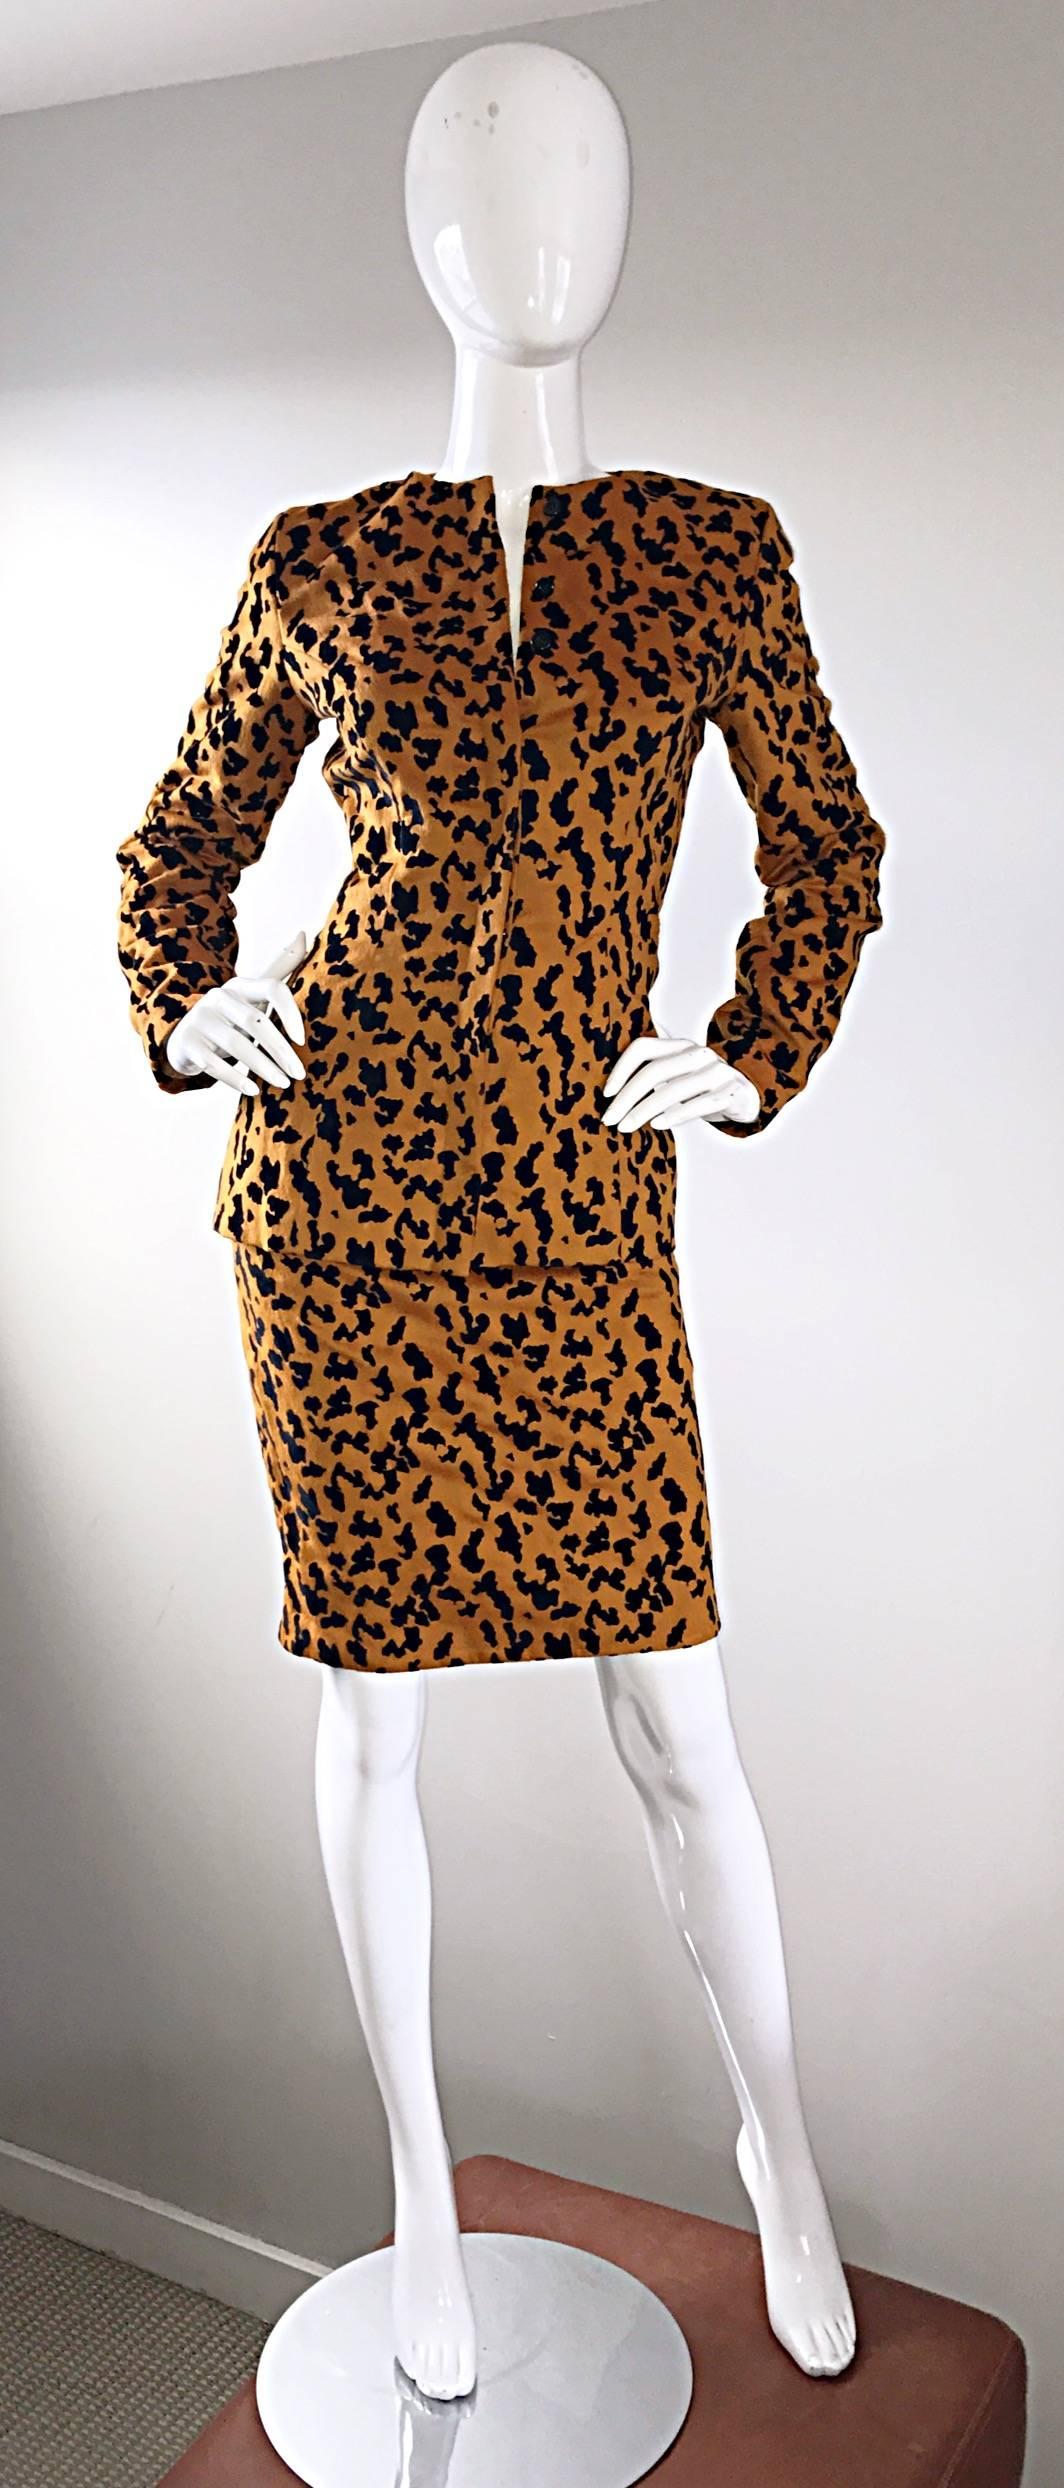 Stylish vintage 80s VICKY TIEL COUTURE leopard print / cheetah wool and velvet tailored skirt suit! Terracotta colored soft virgin wool, with black silk velvet leopard print throughout. High waisted pencil skirt features a hidden zipper up the side